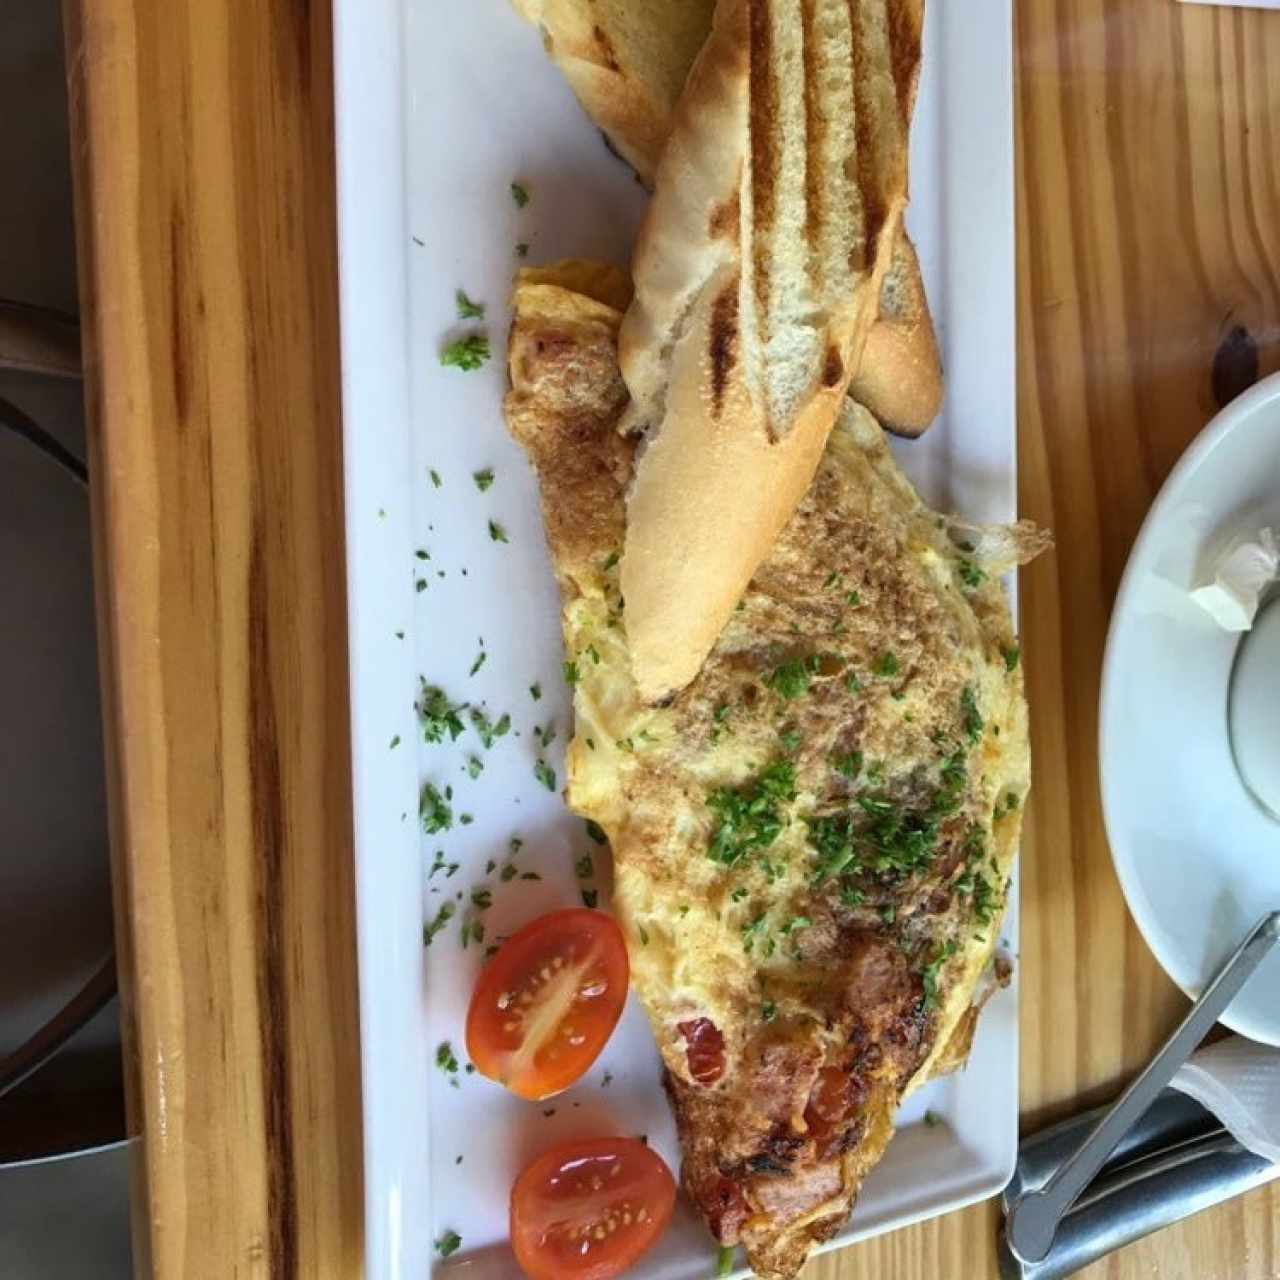 Omelette con Jamón y Pavo